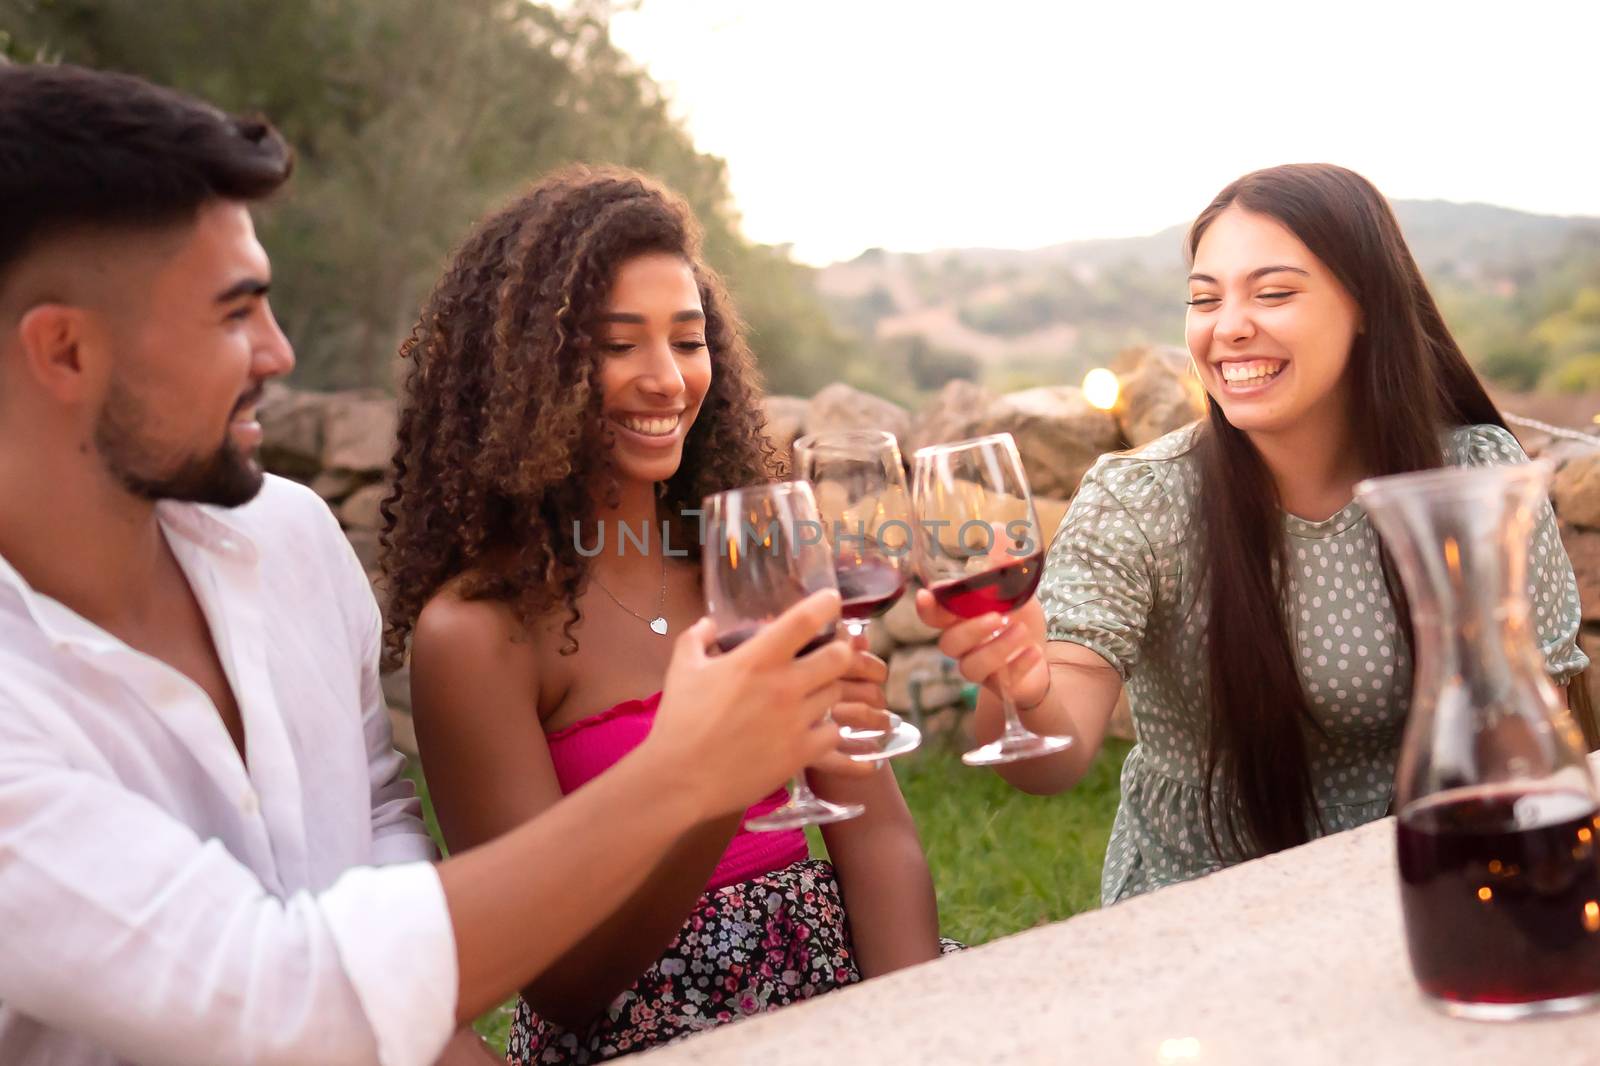 Three friends clinking glasses outdoor at sunset - Mixed race person group toasting with red wine glasses in countryside for the vineyard harvest end in Tuscany - Vintage look photograph